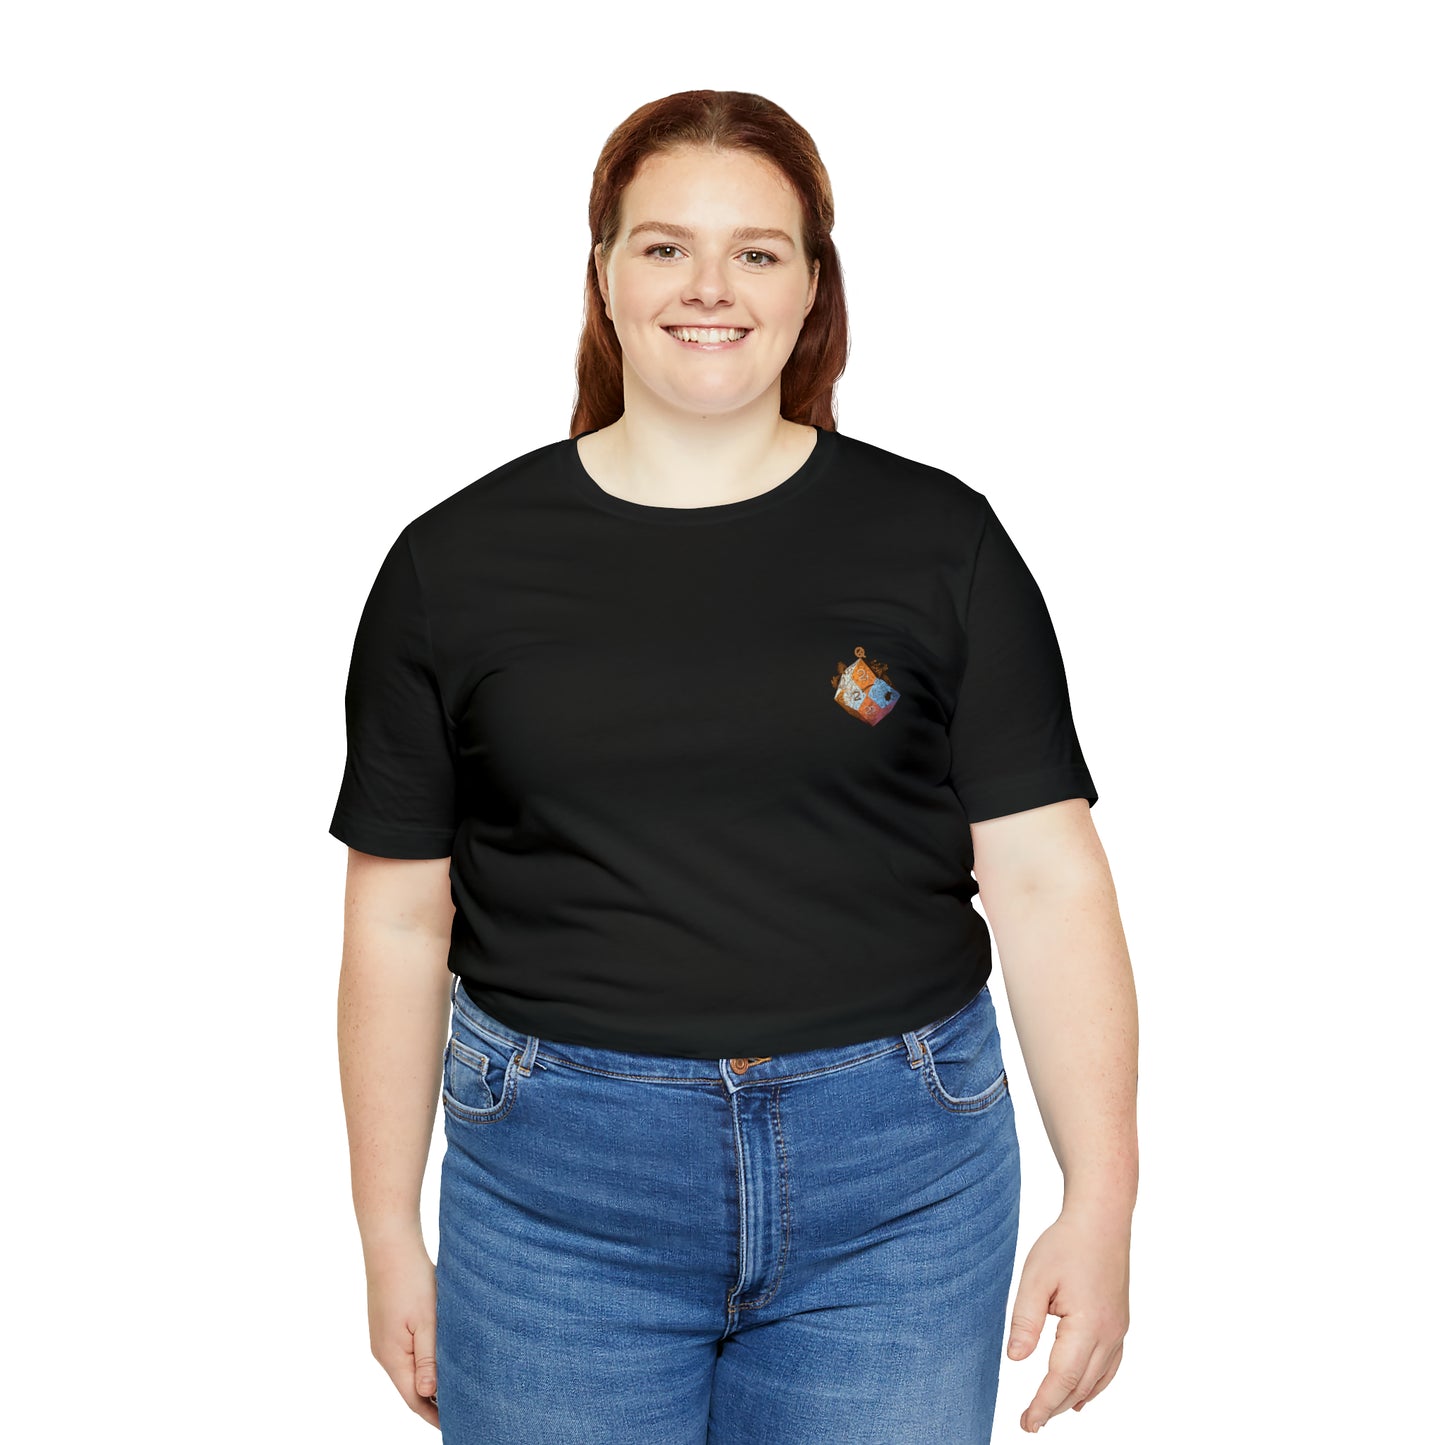 black-quest-thread-tee-shirt-with-small-orange-blue-d20-dice-on-left-chest-of-shirt